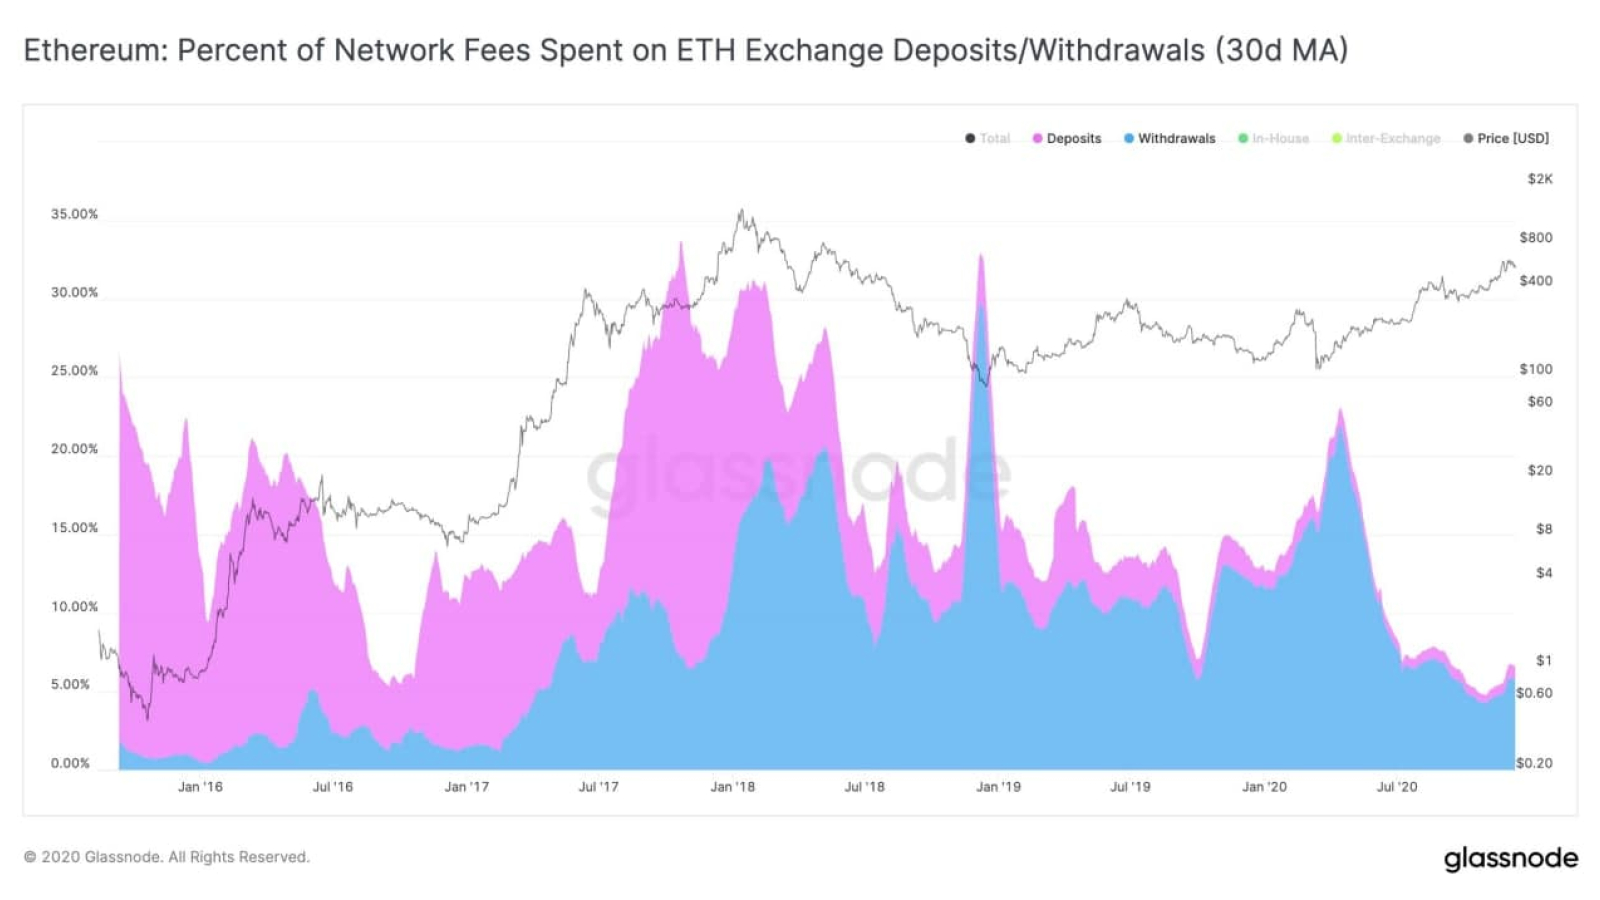 Network fees on Ethereum spent on centralized exchanges